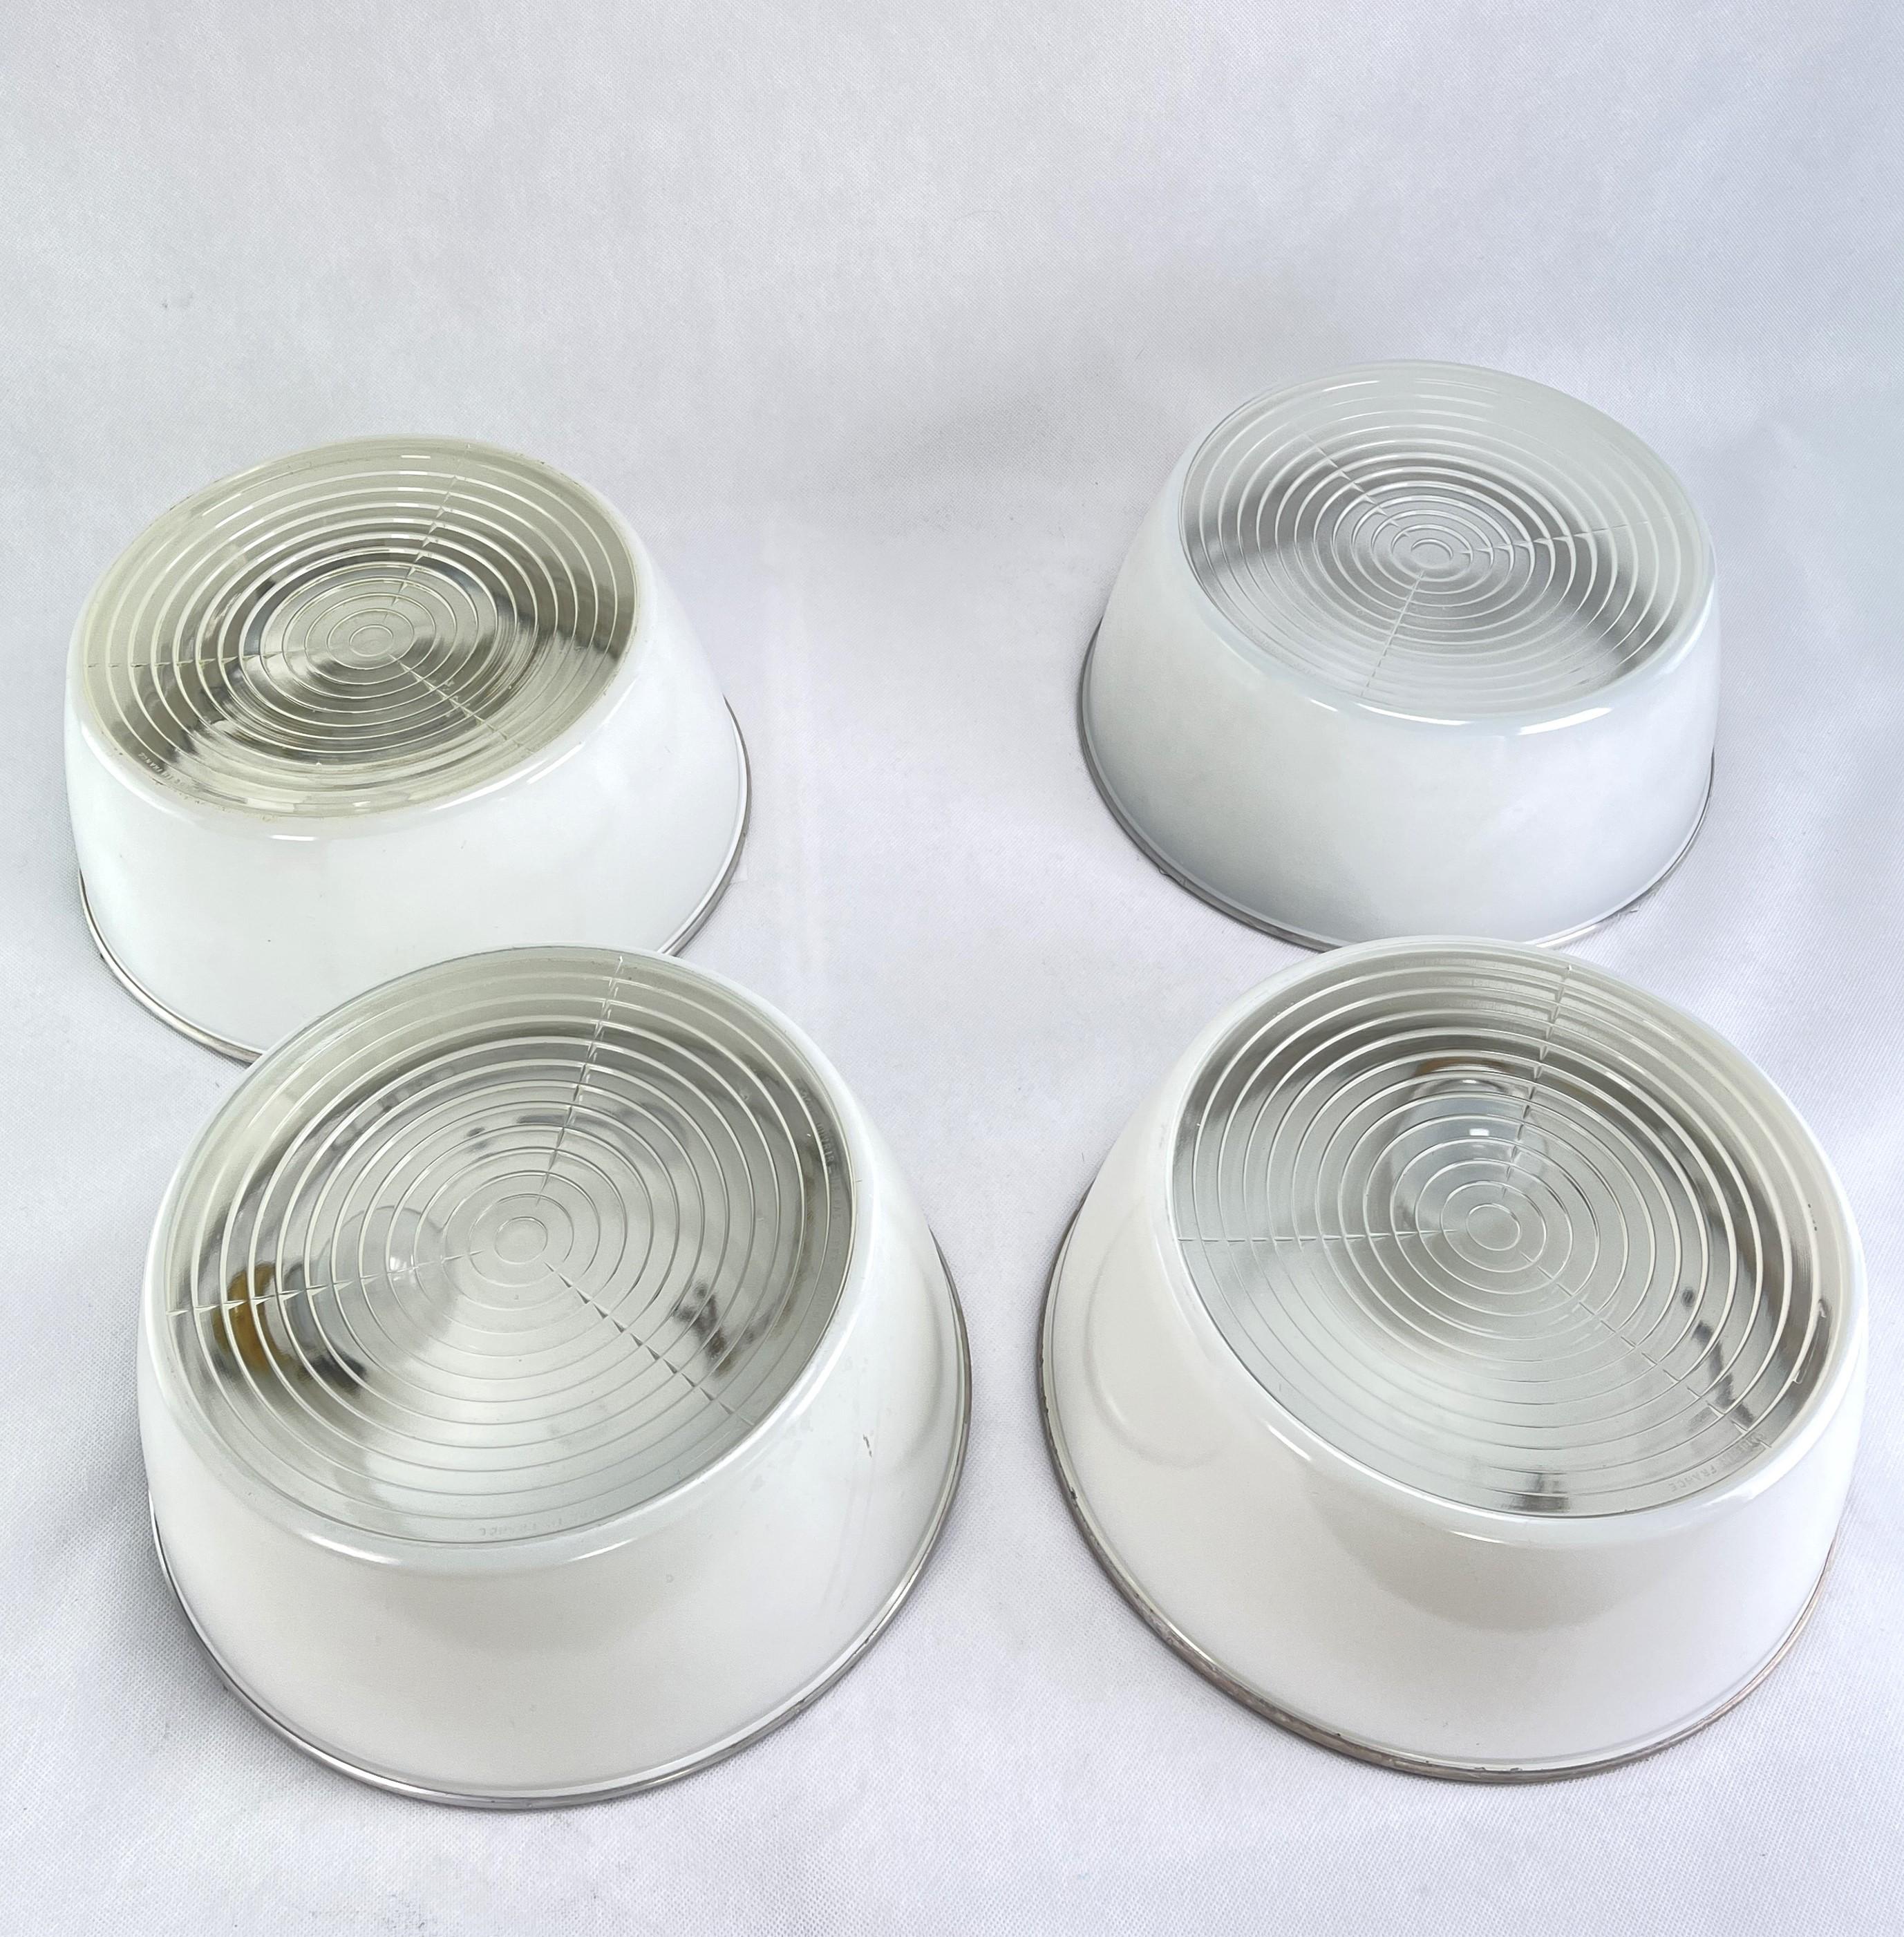 Art Deco ceiling or wall light - 1920s-1930s

This item is available in a set of four. The lamp is an original piece from the Art Deco era. The Holophane flush mount has the model number: 3415-No25

Each lamp has an E27 socket.